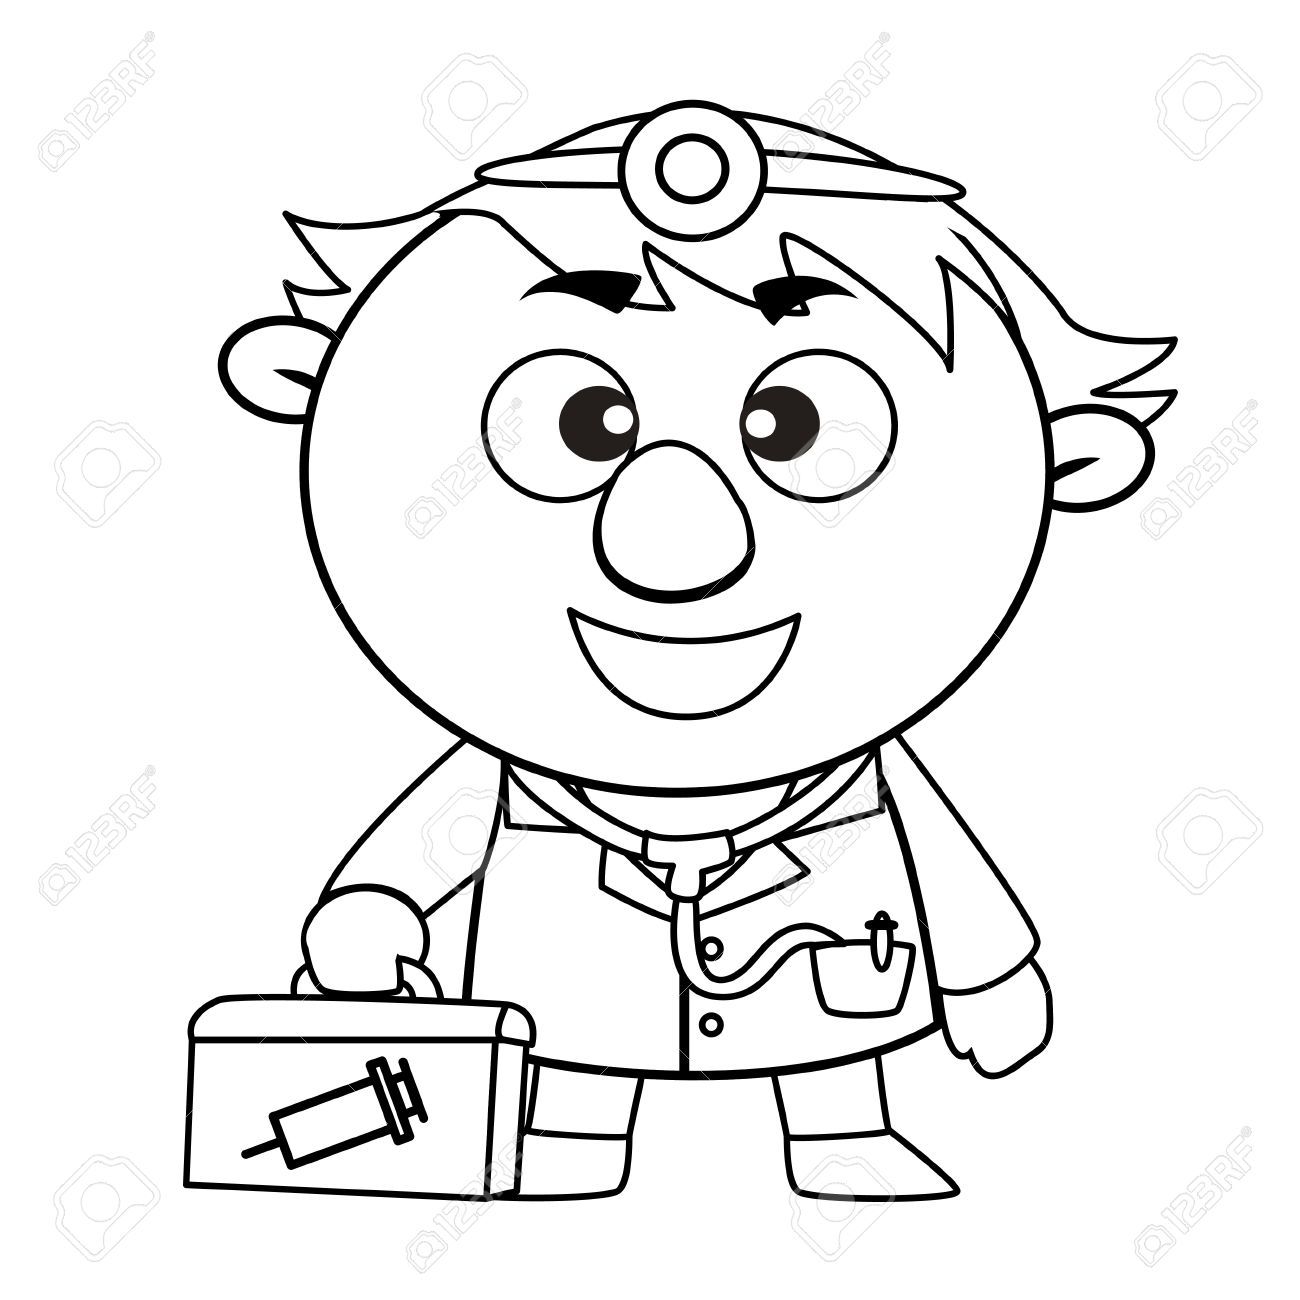 Clipart doctor black and white 4 » Clipart Portal.